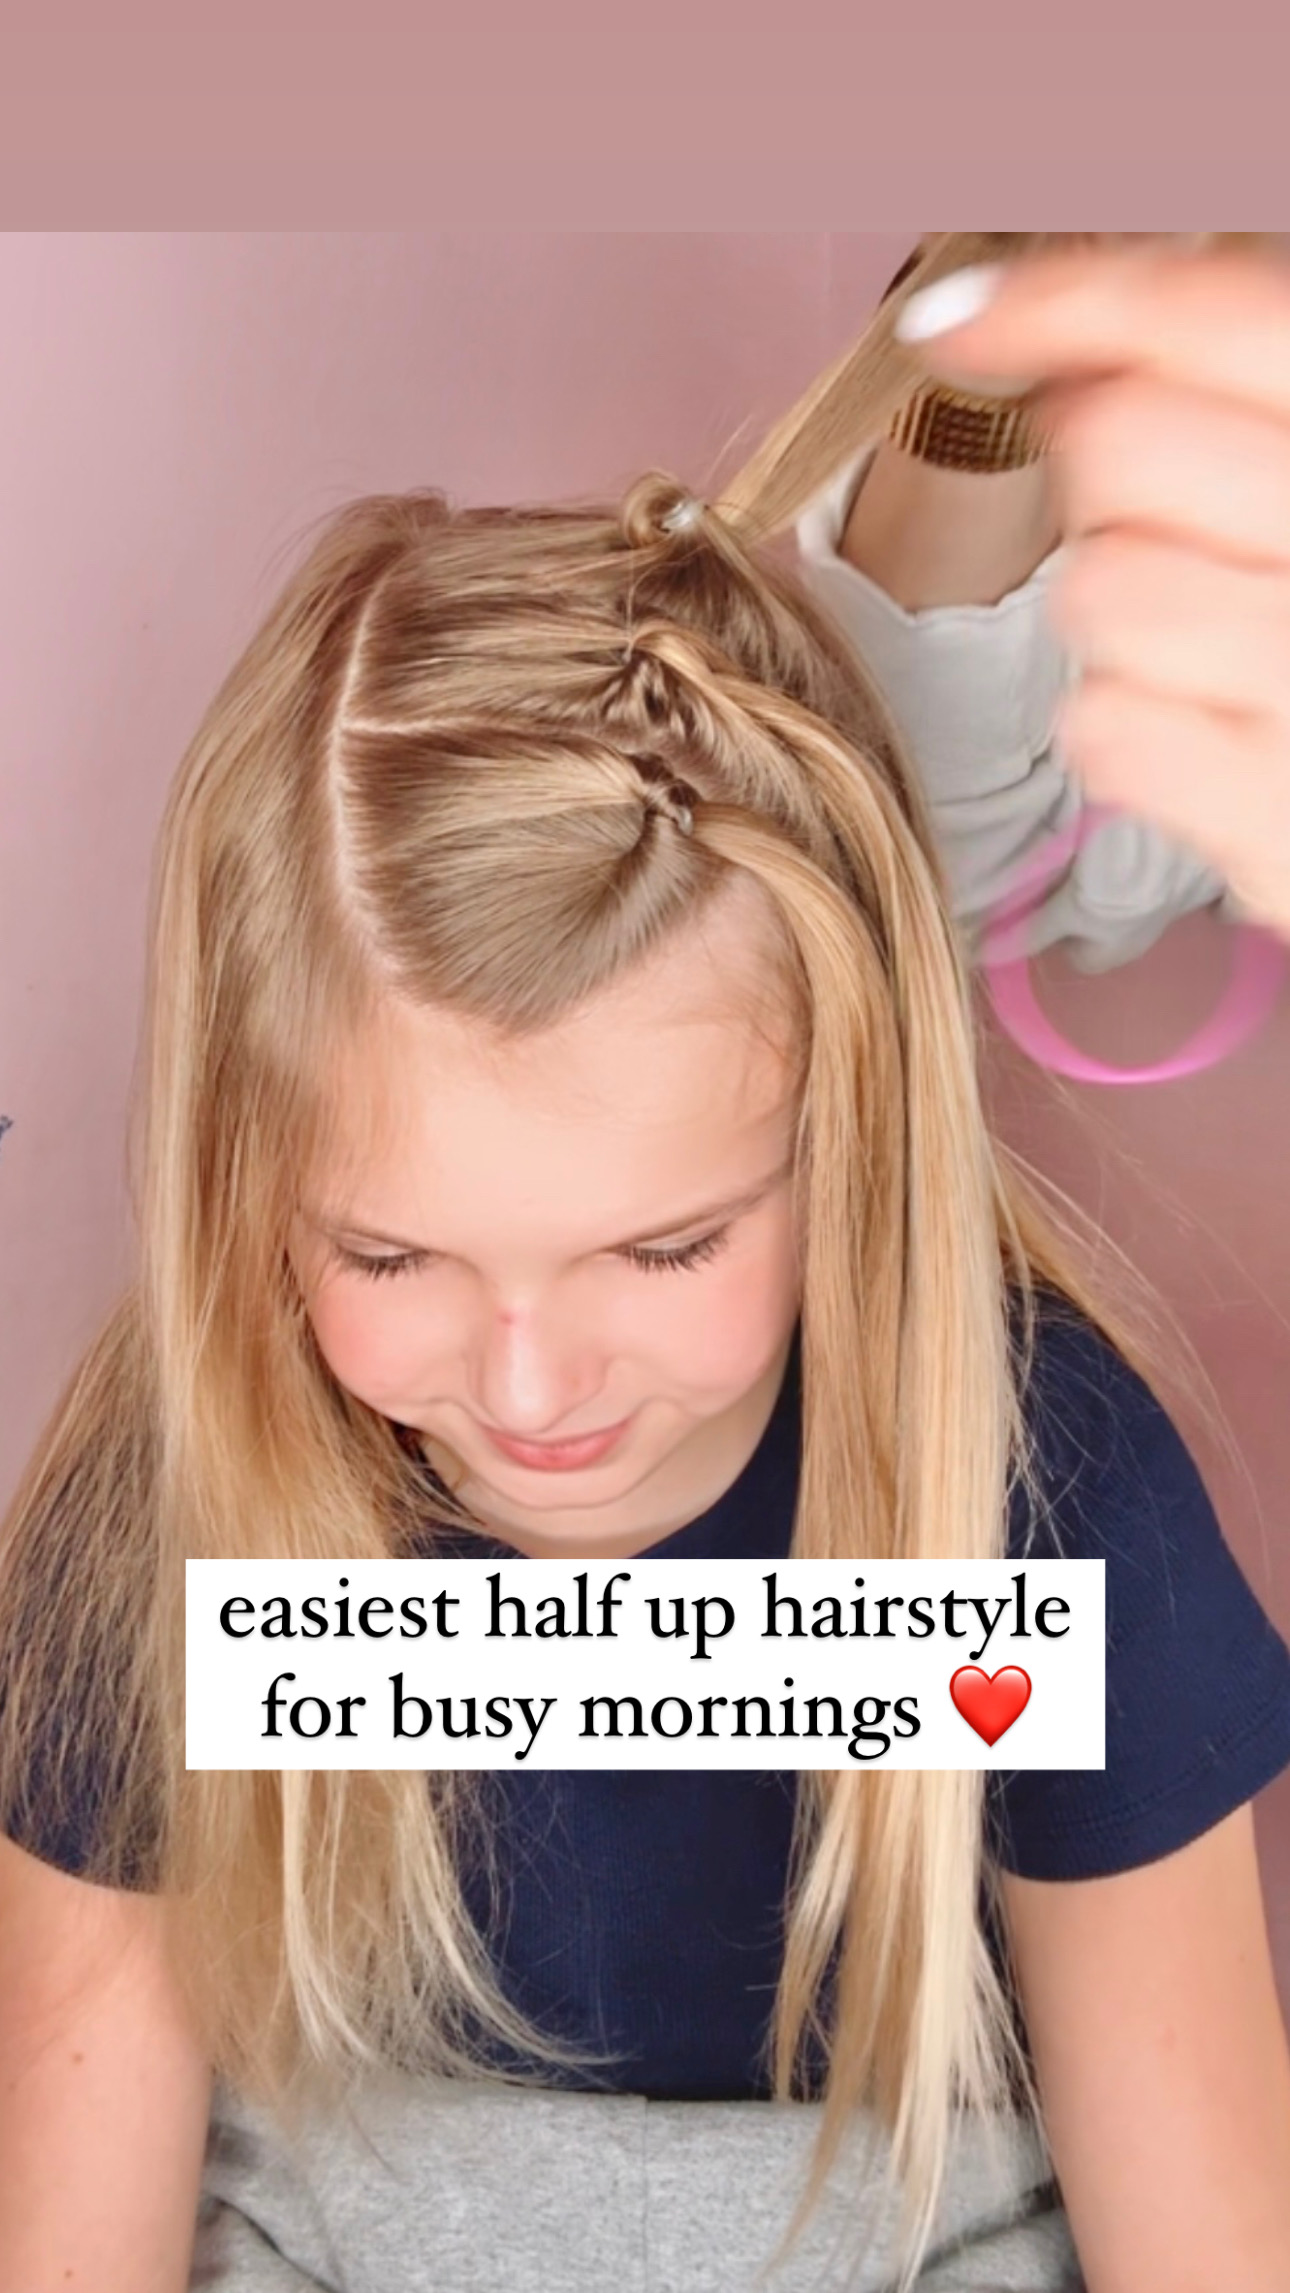 5 EASY CURLY HAIRSTYLES | for work and school - YouTube